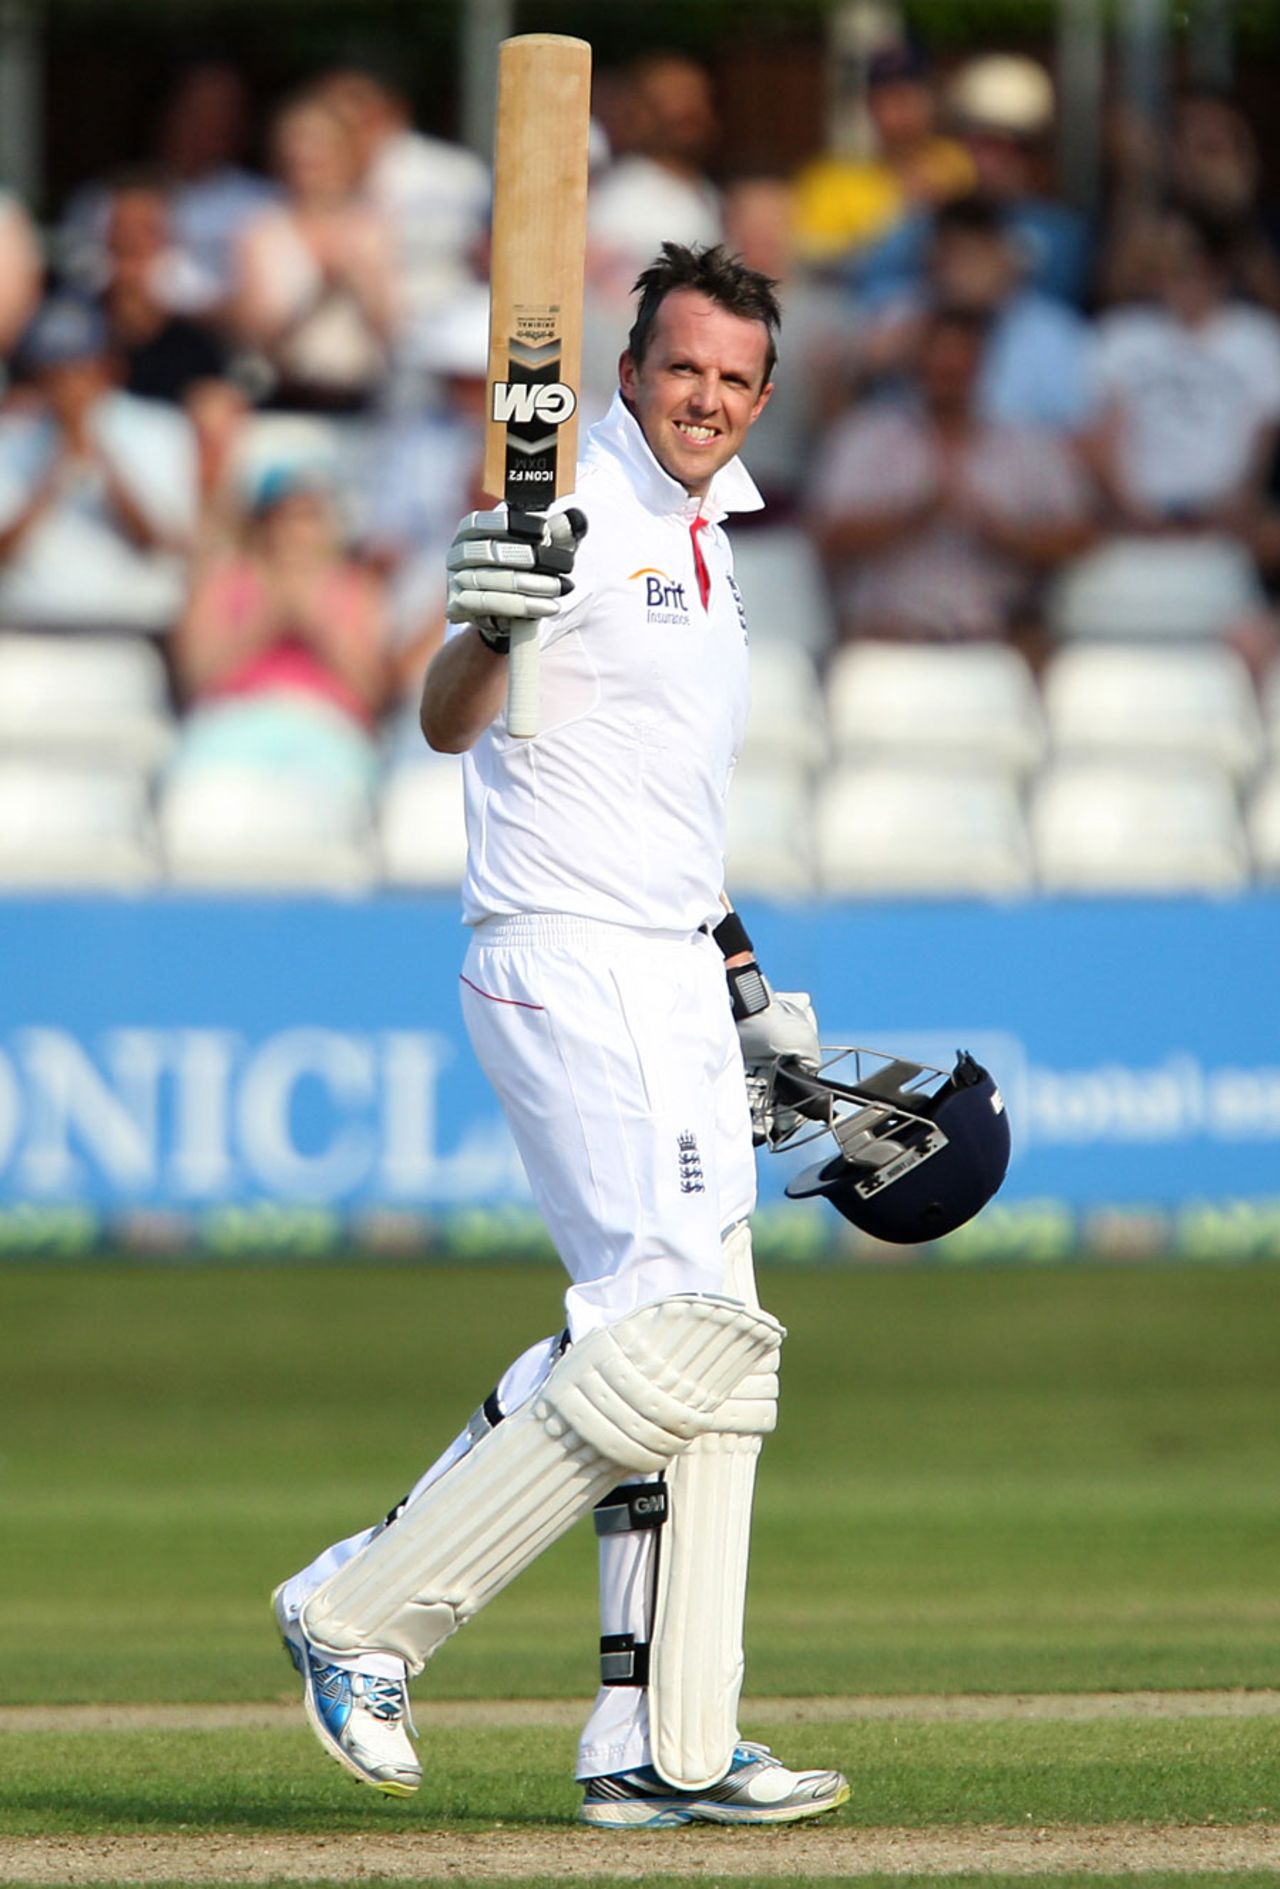 Graeme Swann reached his fifty off 68 deliveries, Essex v England, 1st day, Chelmsford, June 30, 2013